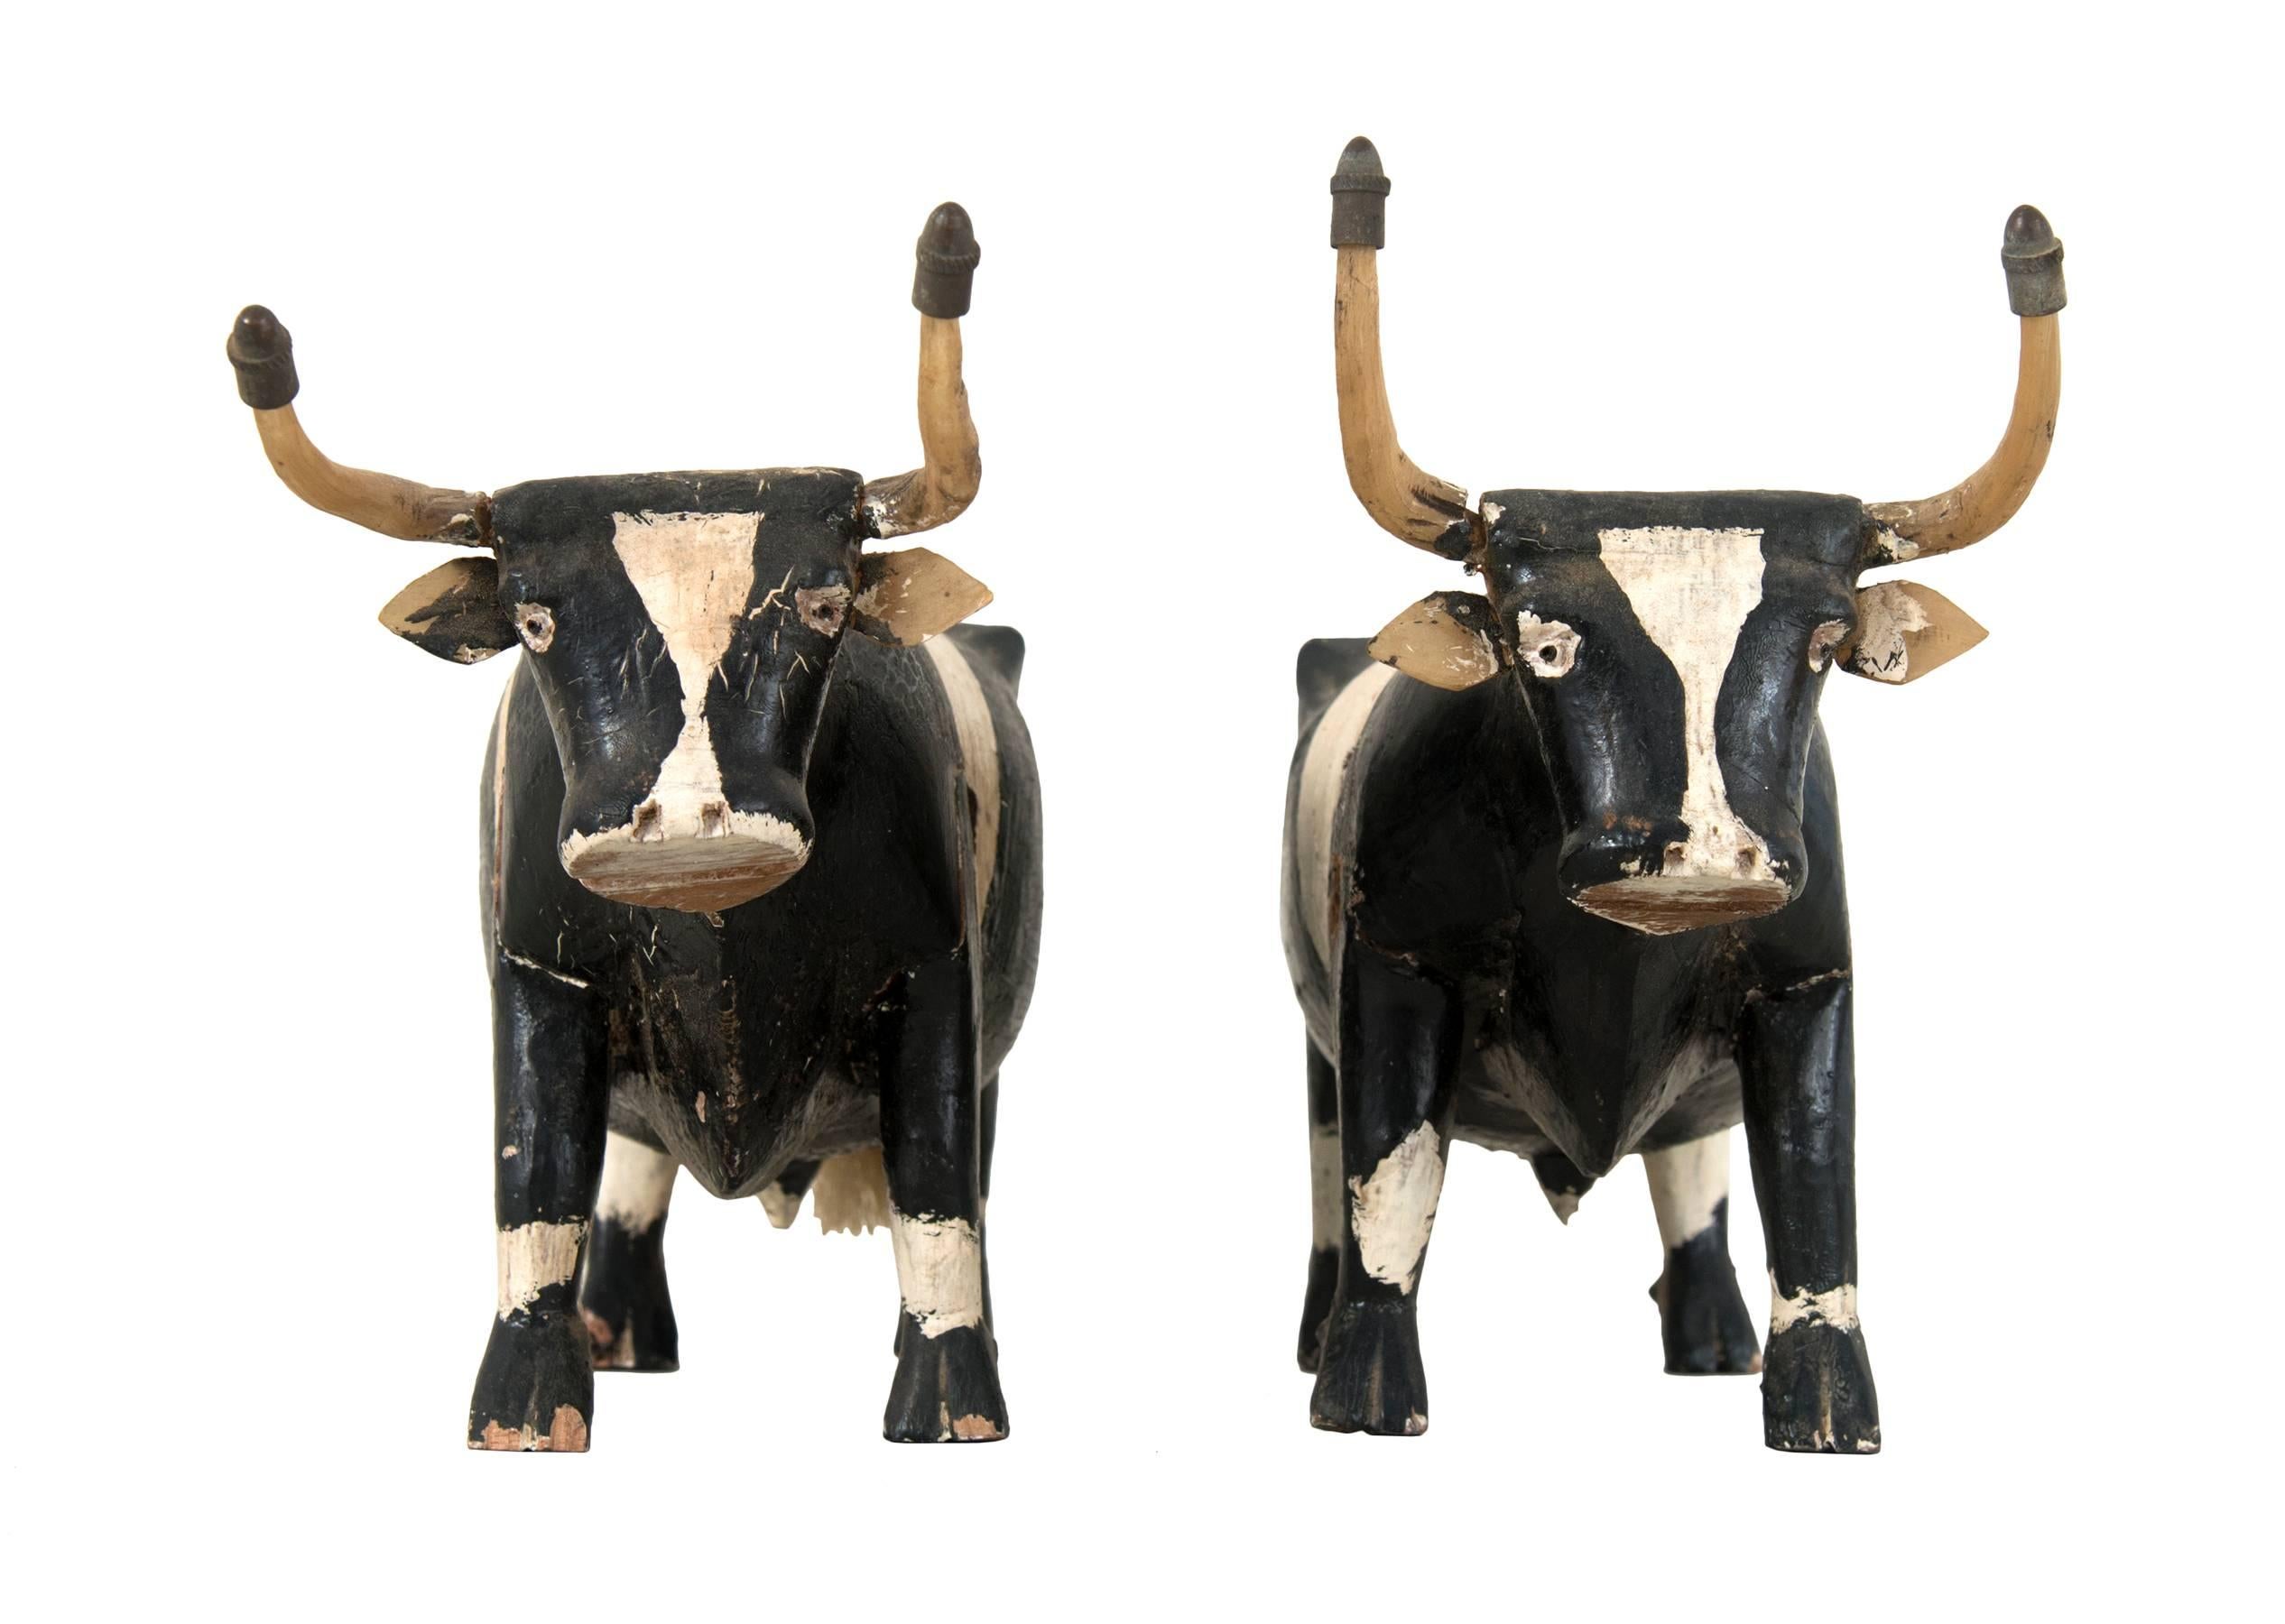 Pair of carved Folk Art steers. Carved wood with original paint, bone horns with metal tips. Beautifully stylized, American, circa 1920. 
Each steer is a slightly different size. These are the extreme dimensions 10 1/4